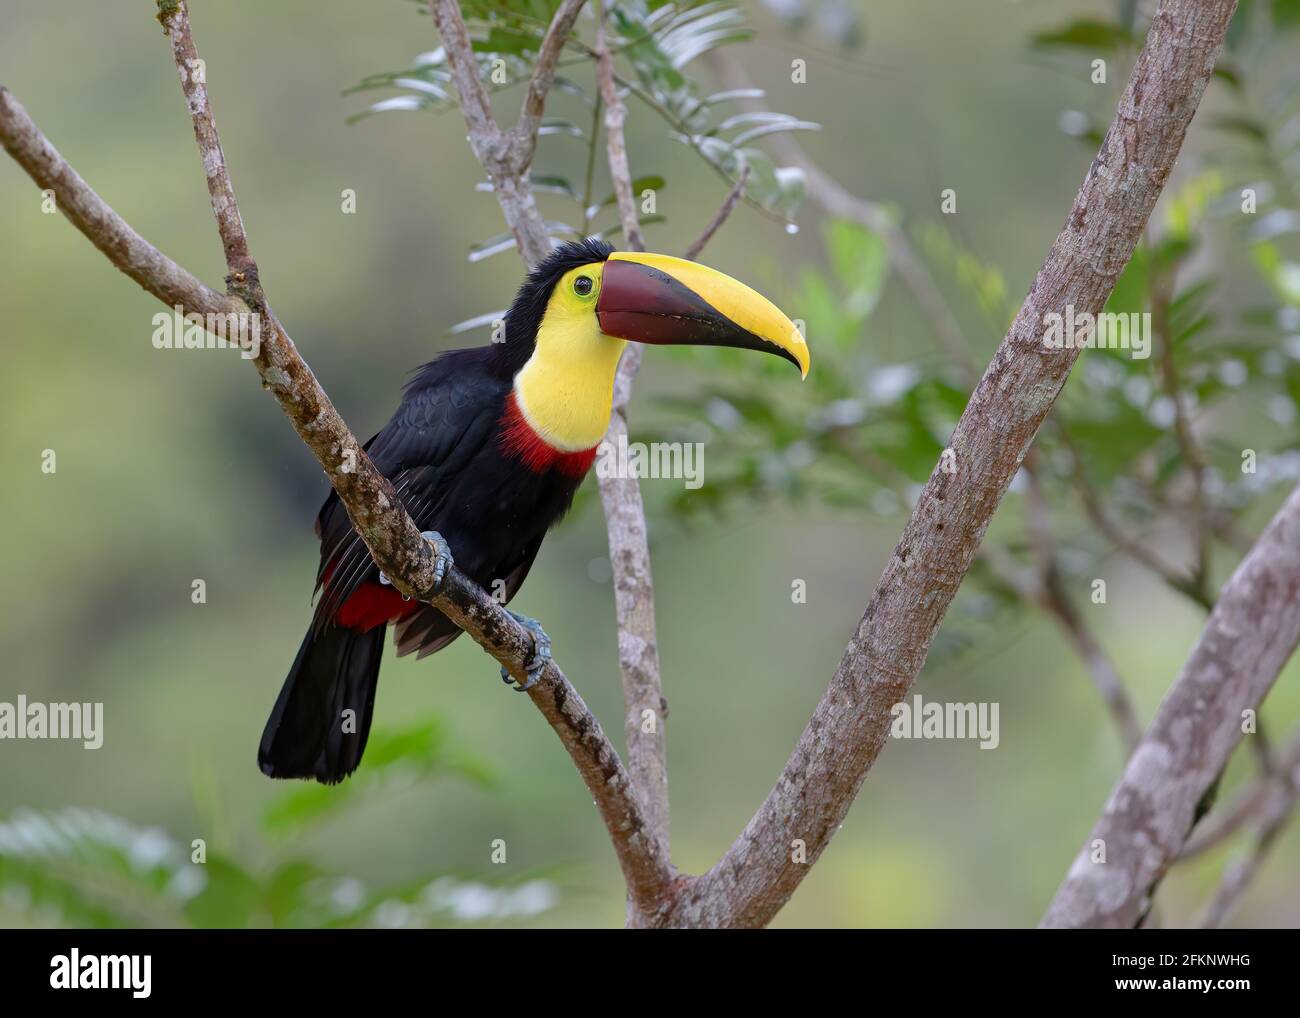 Chestnut-mandibled Toucan or Swainson's Toucan perched on a mossy branch in the tropical rainforests, Boca Tapada, Laguna de Lagarto Lodge, Costa Rica Stock Photo